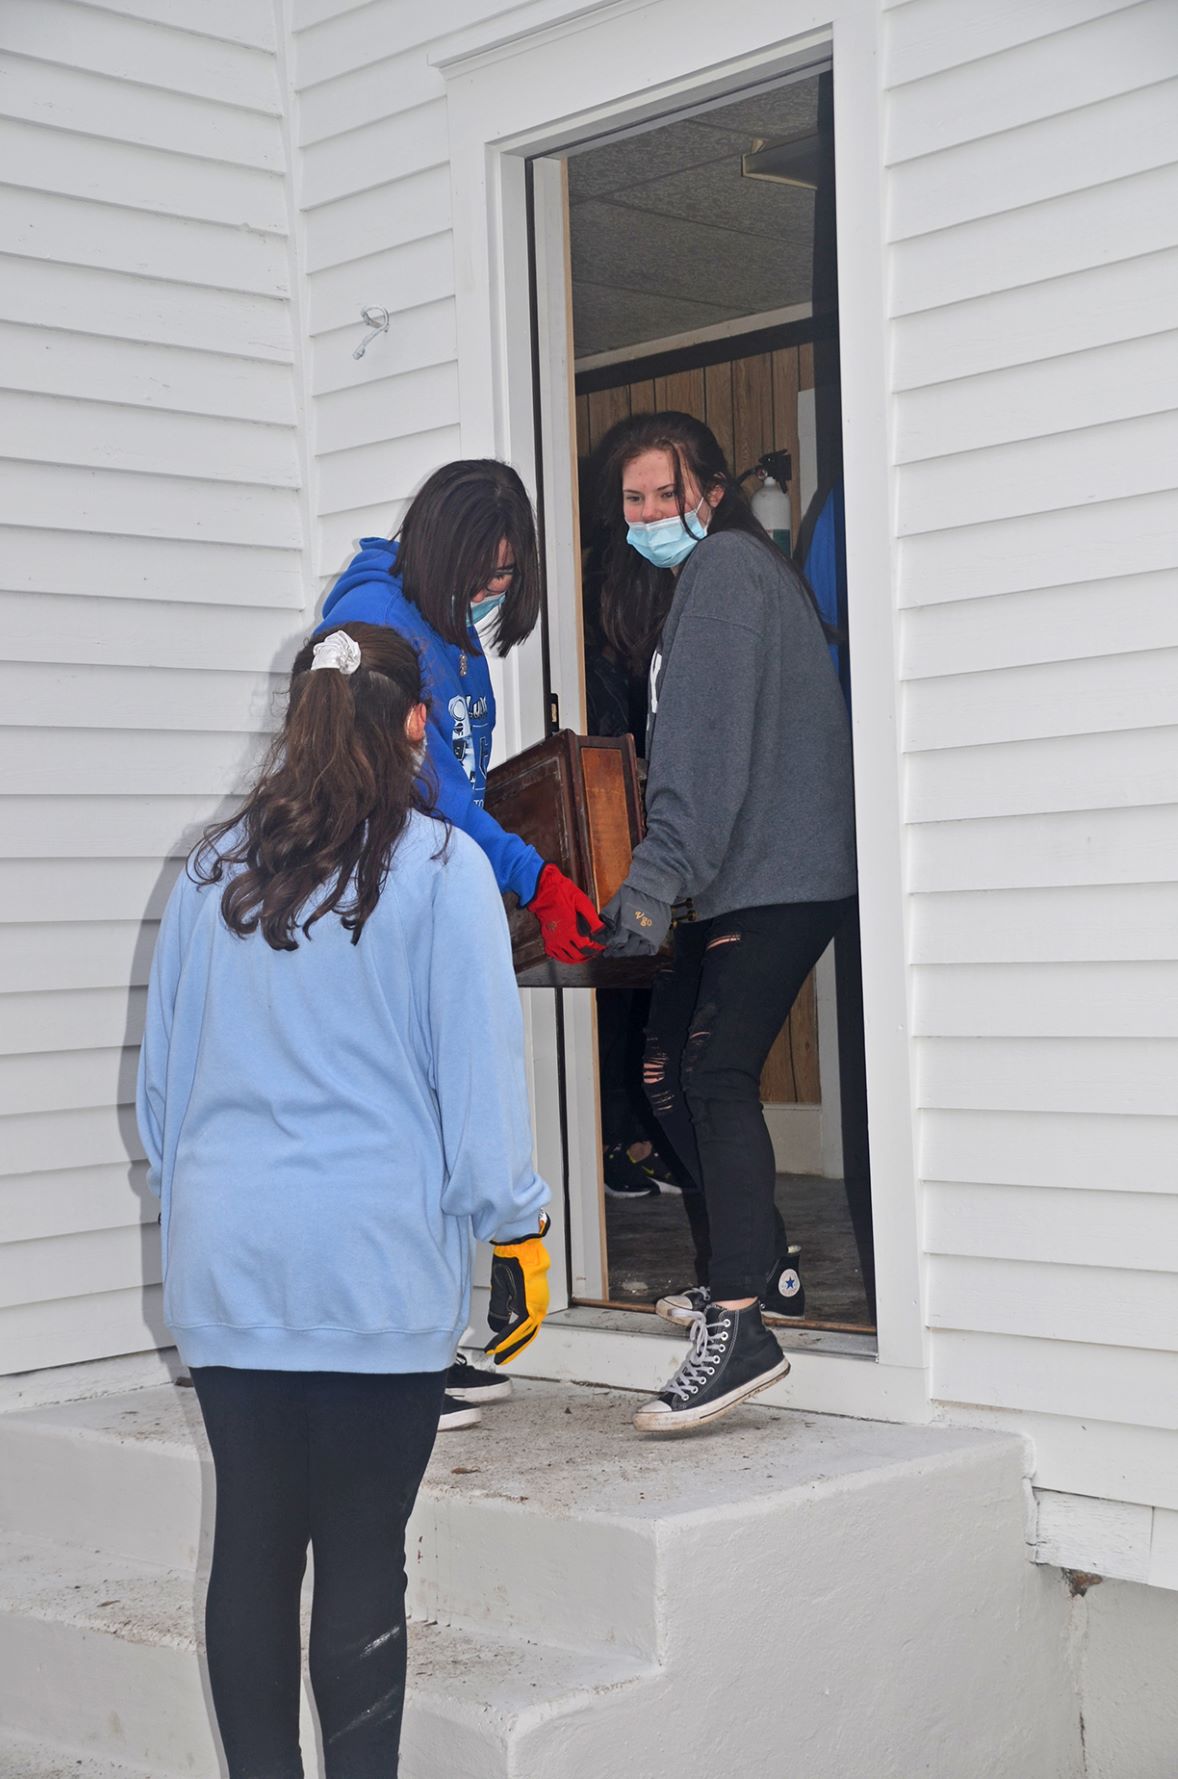 Members of the Stockton community, along with high school students from Hammonton High School’s Leo Club, spent the morning at the Eagle Theatre in Hammonton, helping with office and theatre renovations, in addition to outdoor beautification projects.